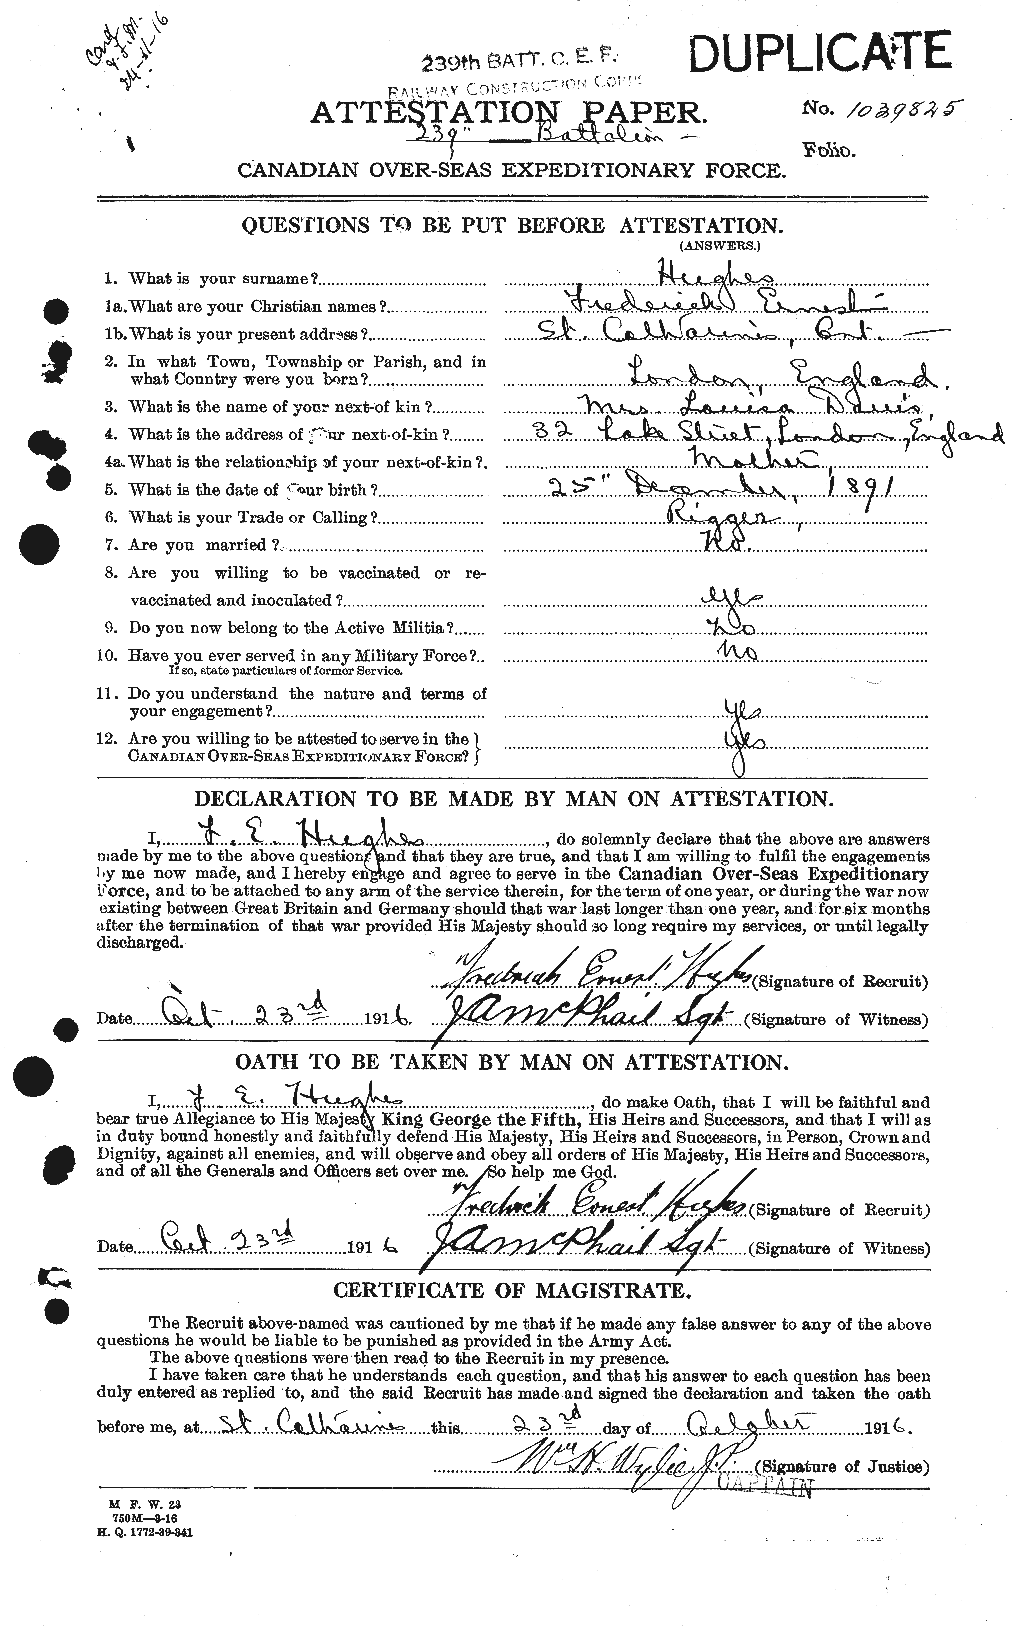 Personnel Records of the First World War - CEF 403796a